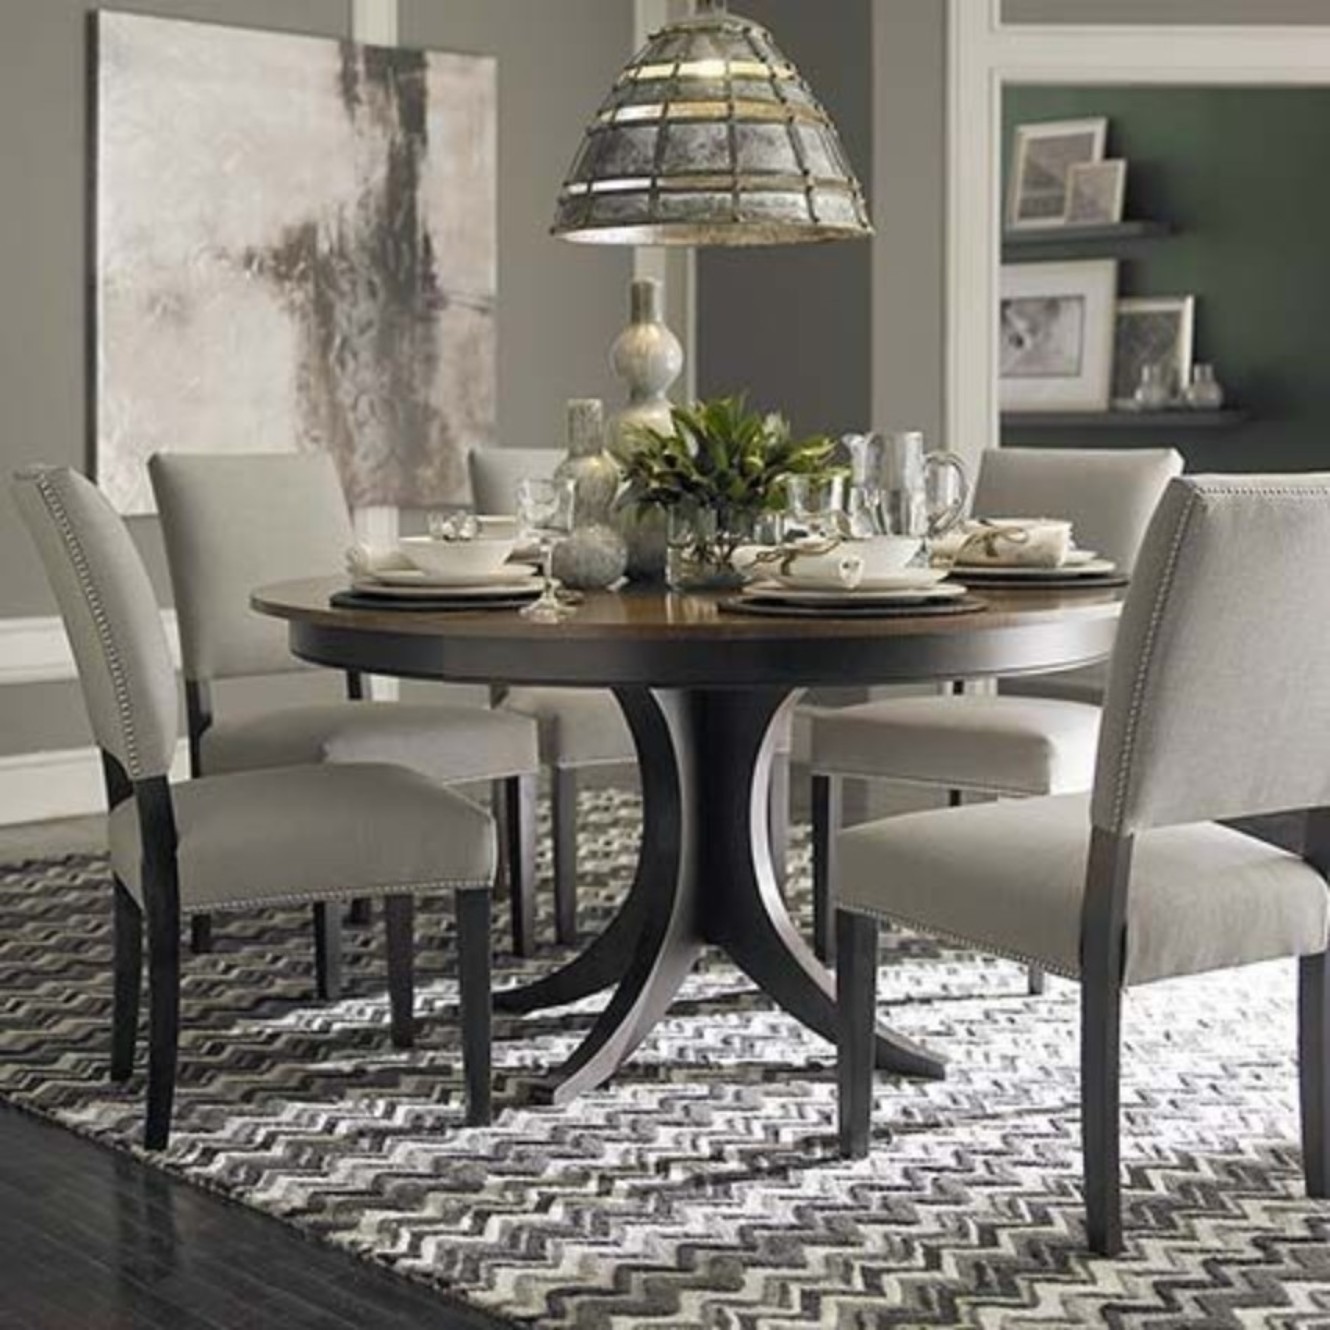 Round table dining room furniture